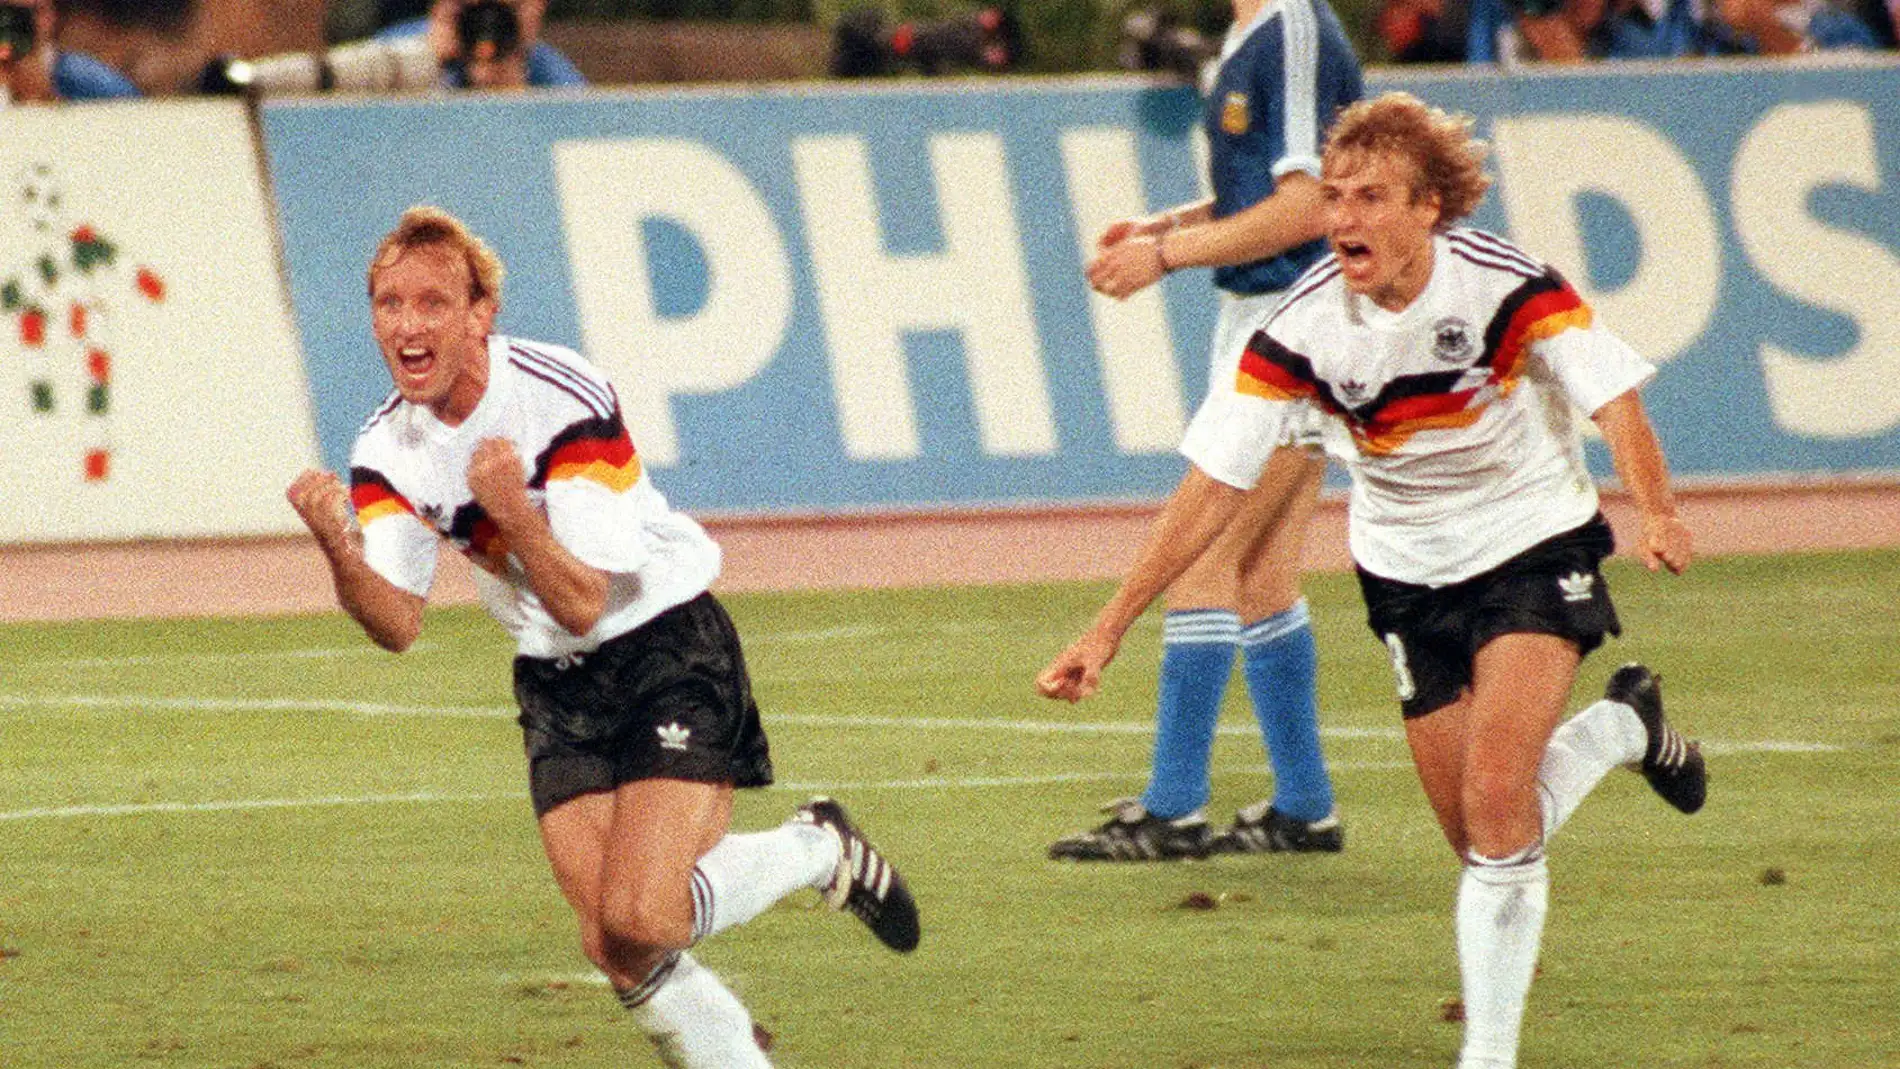 FILED - 08 July 1990, Italy, Roma: Former German international Andreas Brehme (L) and Juergen Klinsmann run across the pitch of the Olympic Stadium in Rome, celebrating after Brehme scored a penalty to give Germany a 1-0 lead. Football World Champion Andreas Brehme died at the age of 63, as his family confirmed to the German Press Agency on 20 February. Photo: Frank Kleefeldt/dpa (Foto de ARCHIVO) 08/07/1990 ONLY FOR USE IN SPAIN